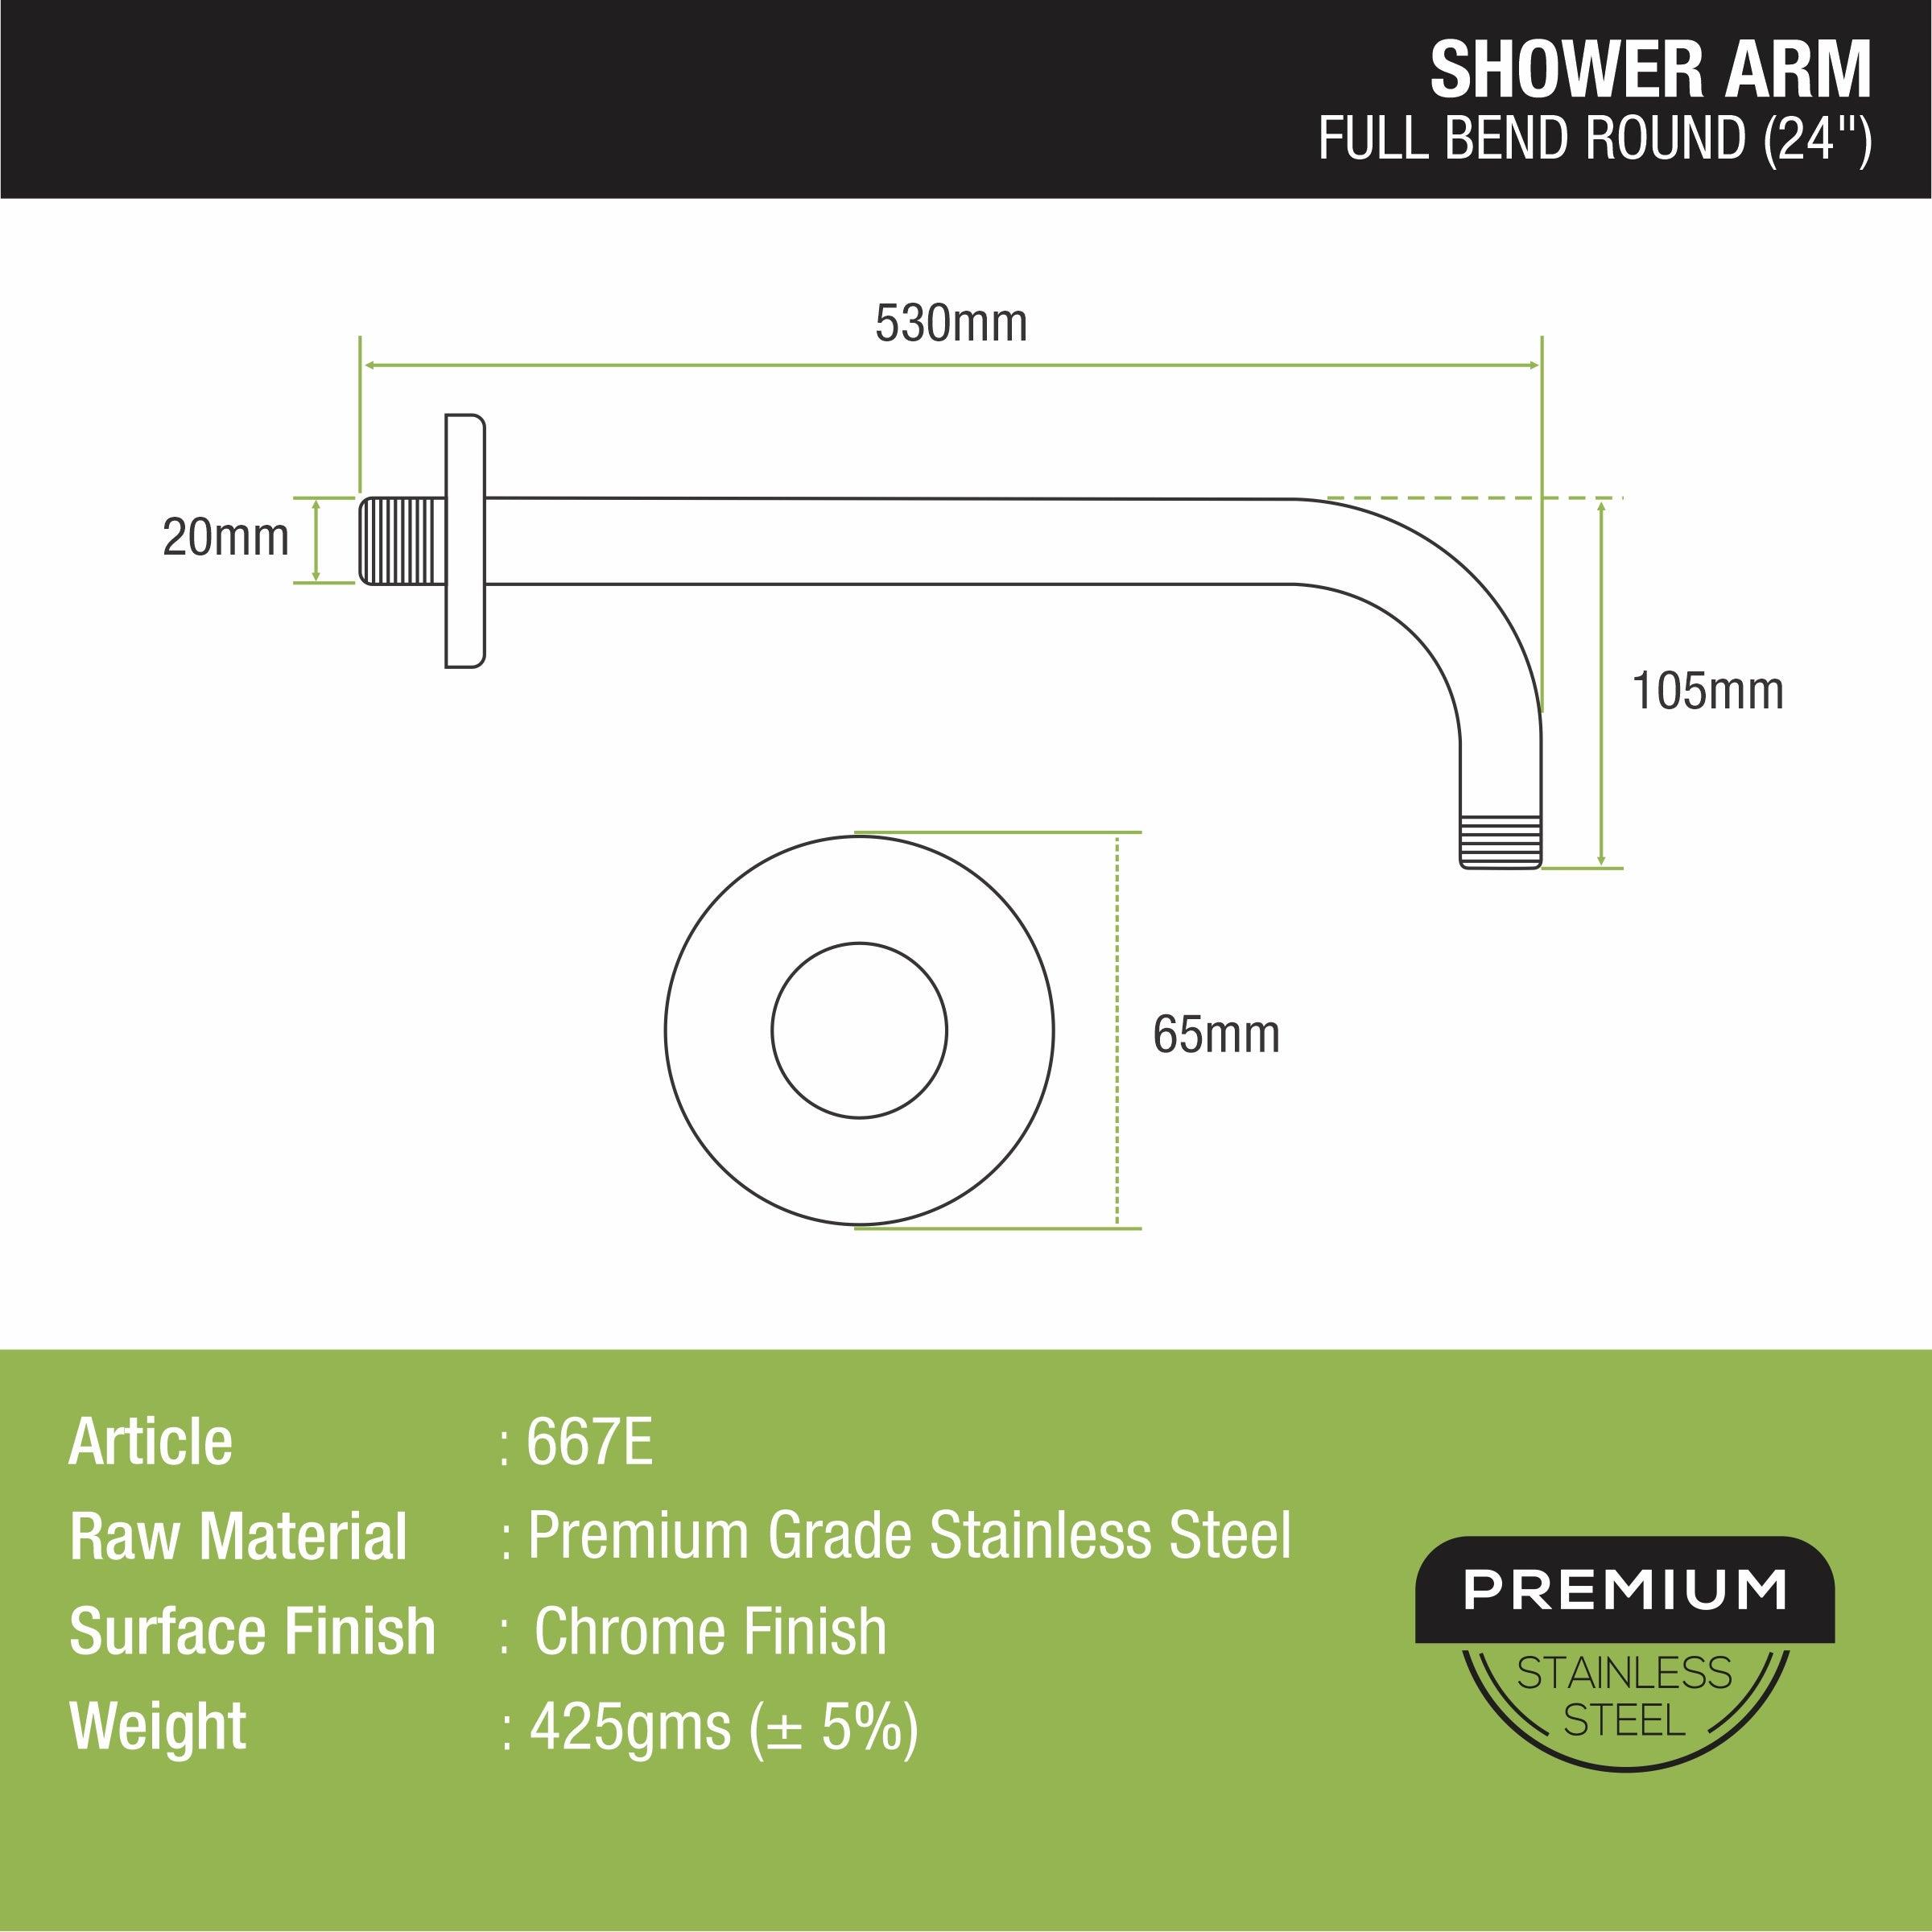 Full Bend Round Shower Arm (24 Inches) sizes and dimensions